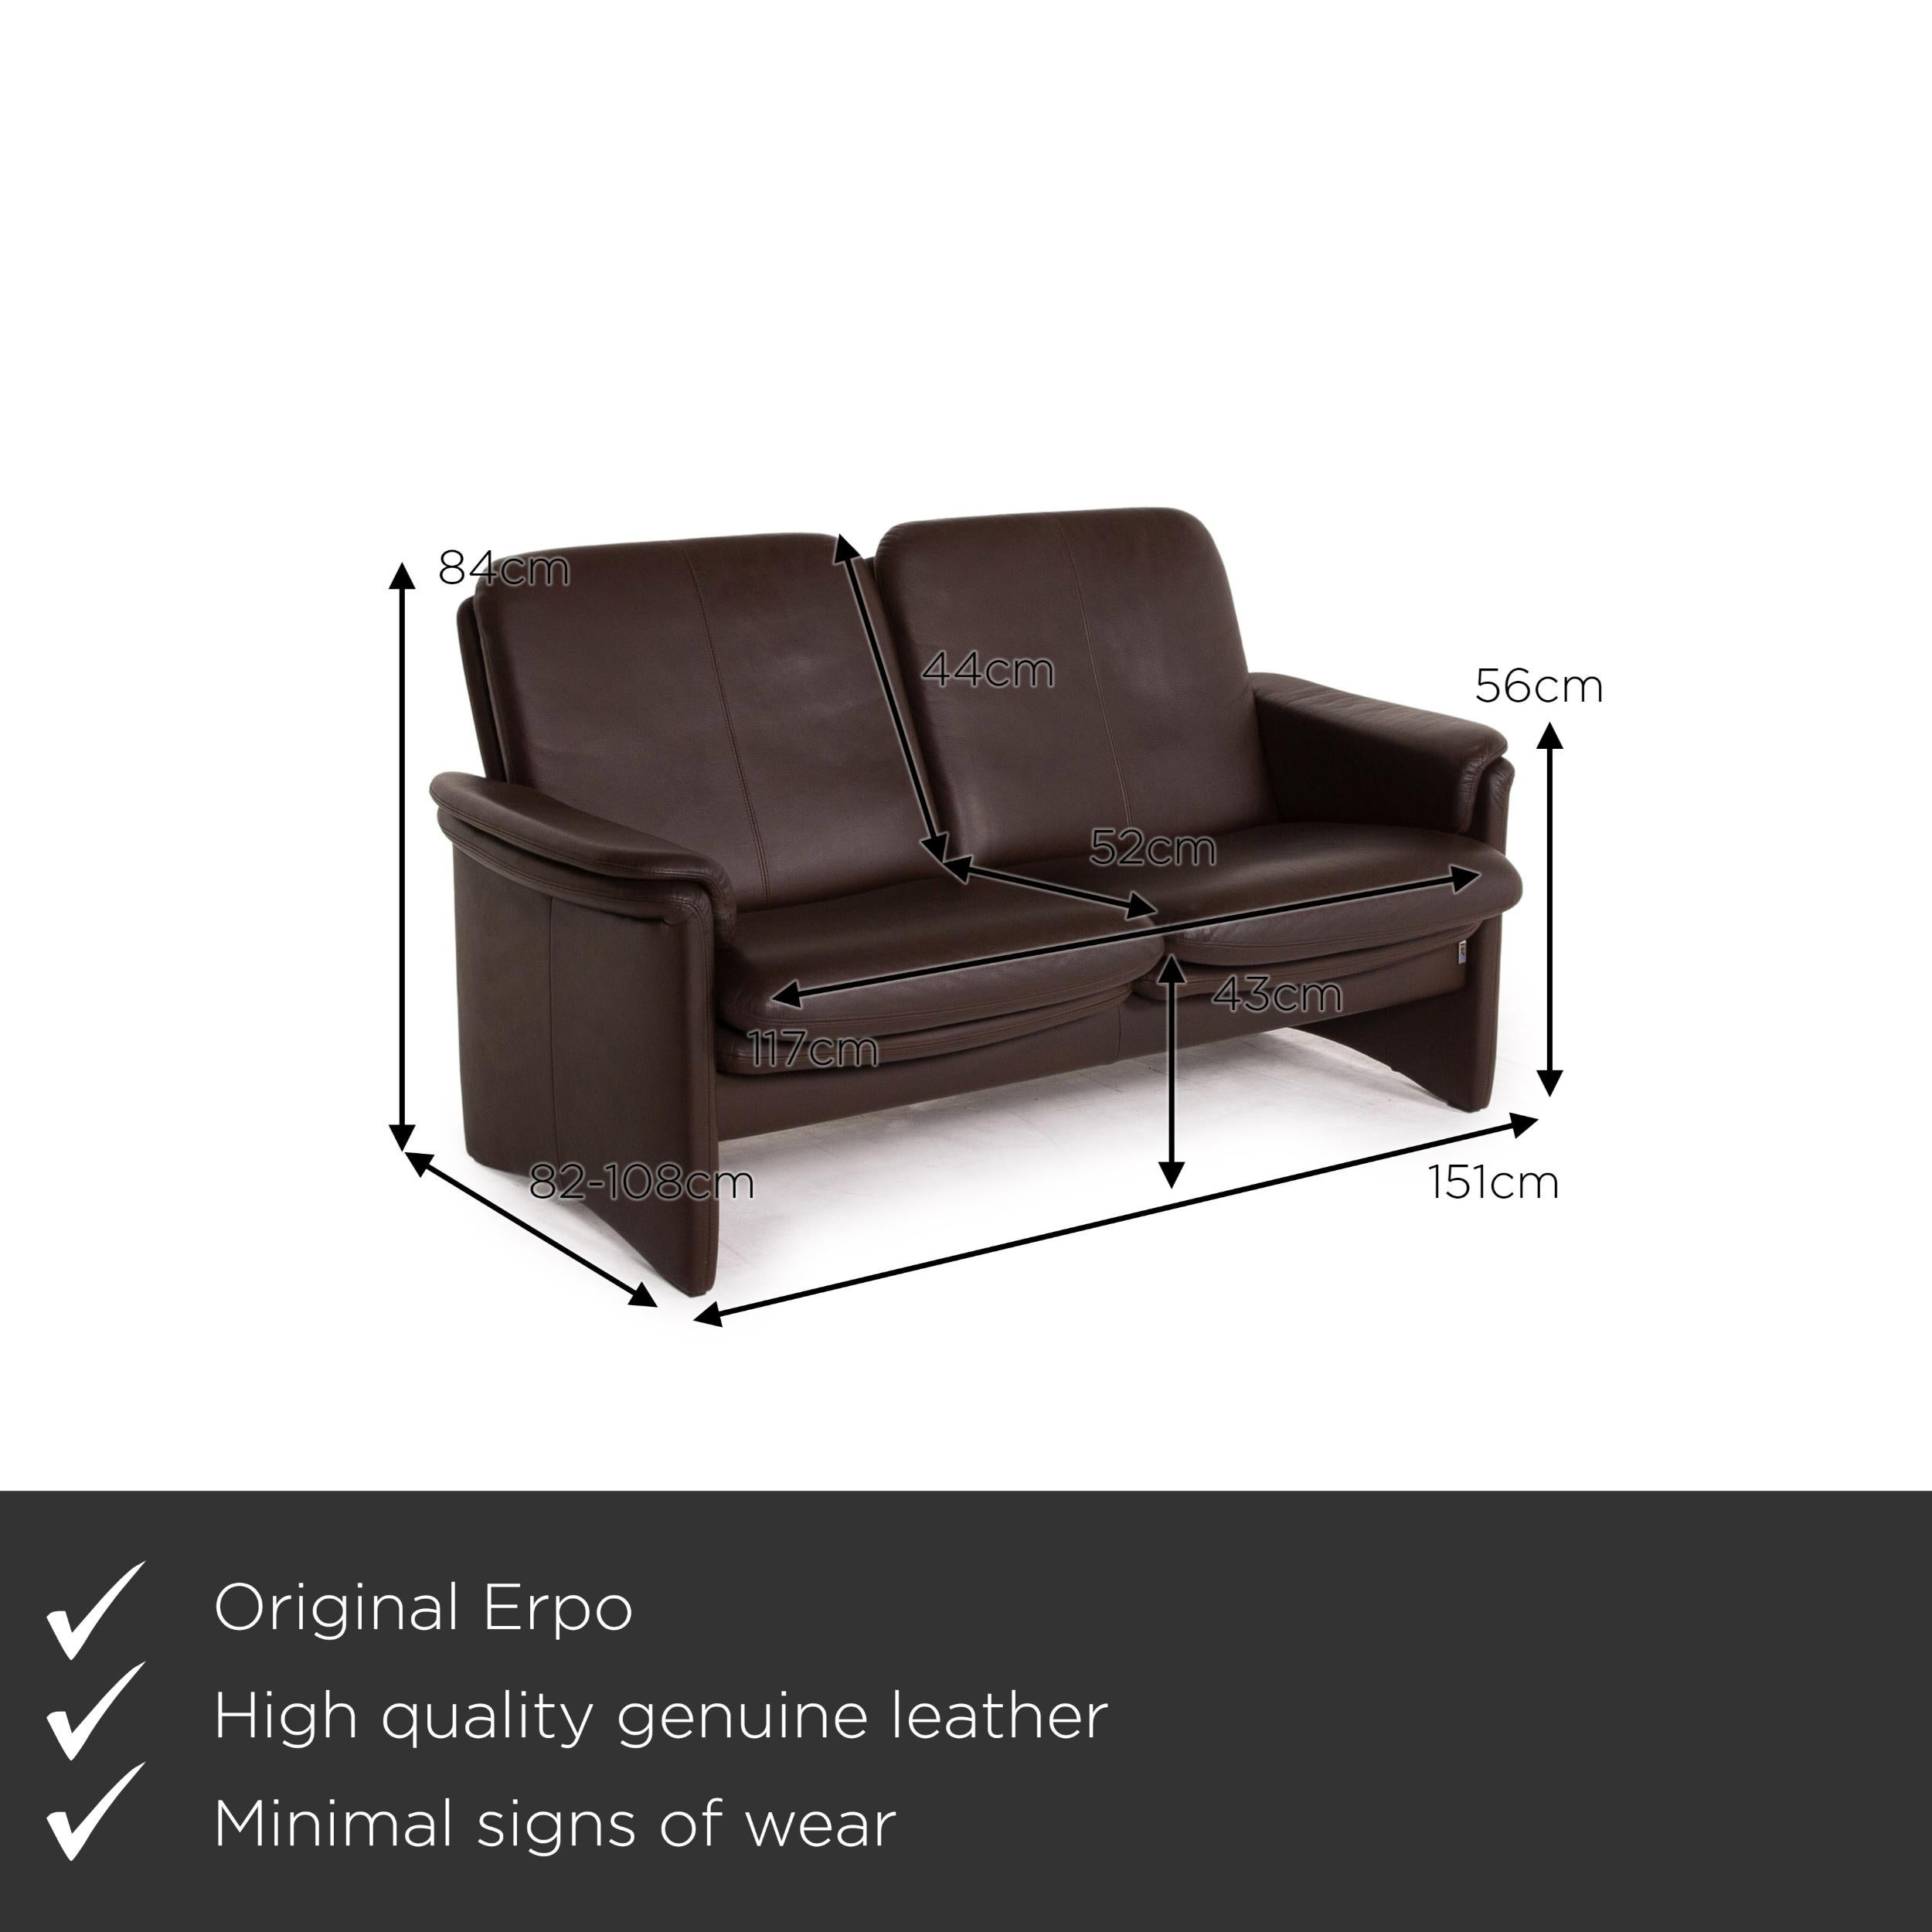 We present to you an Erpo City leather sofa brown dark brown two-seat couch.
 

 Product measurements in centimeters:
 

Depth 82
Width 151
Height 84
Seat height 43
Rest height 56
Seat depth 52
Seat width 117
Back height 44.
 